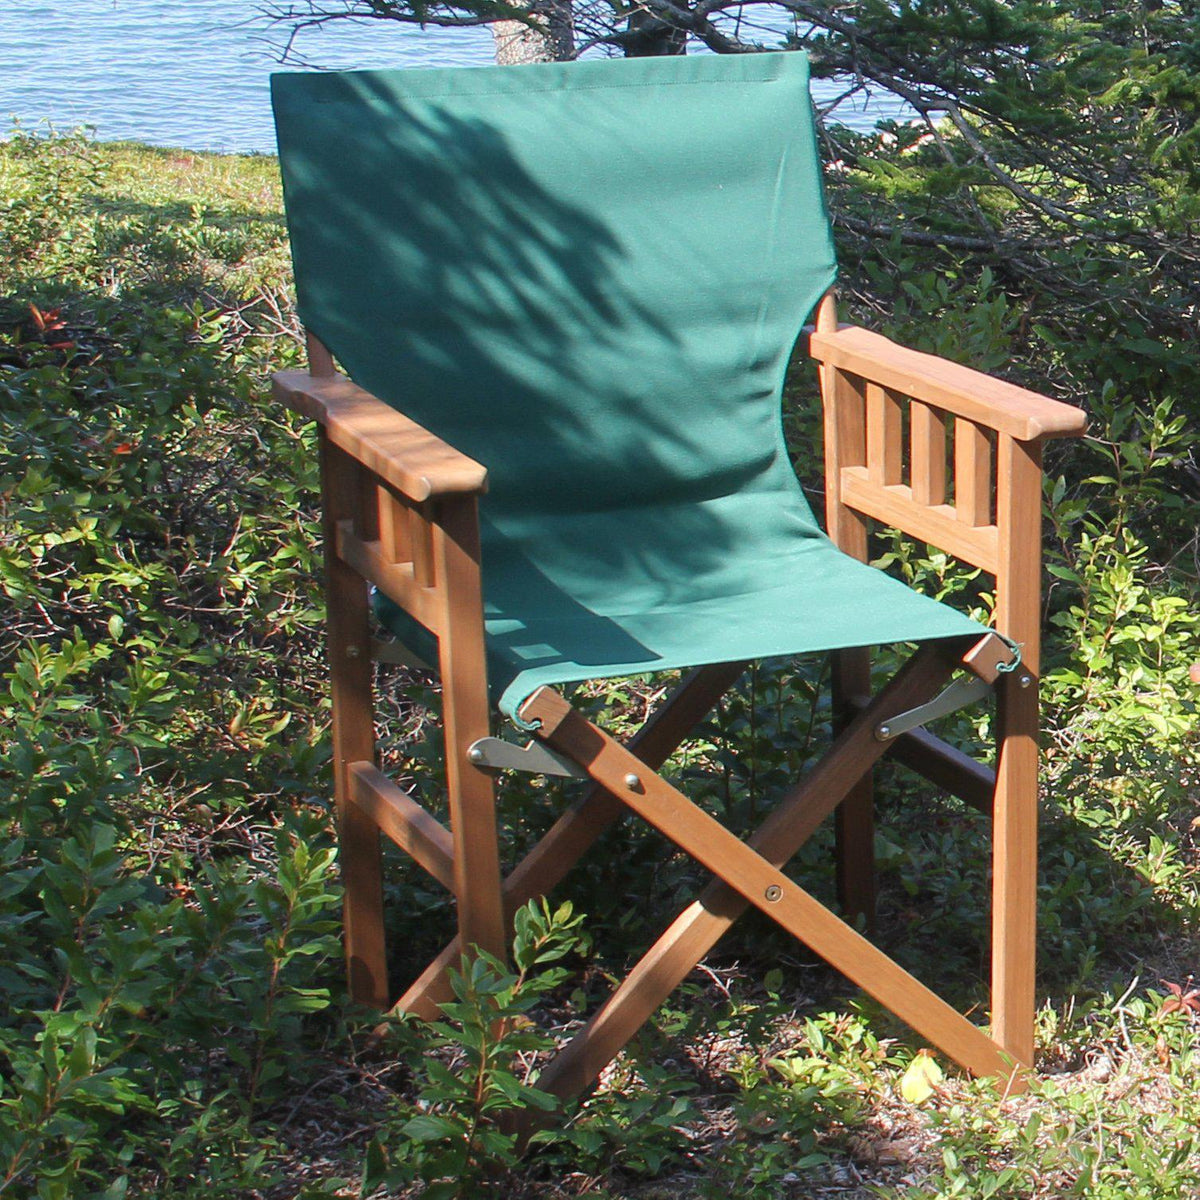 Pangean Campaign Chair, from Byer of Maine